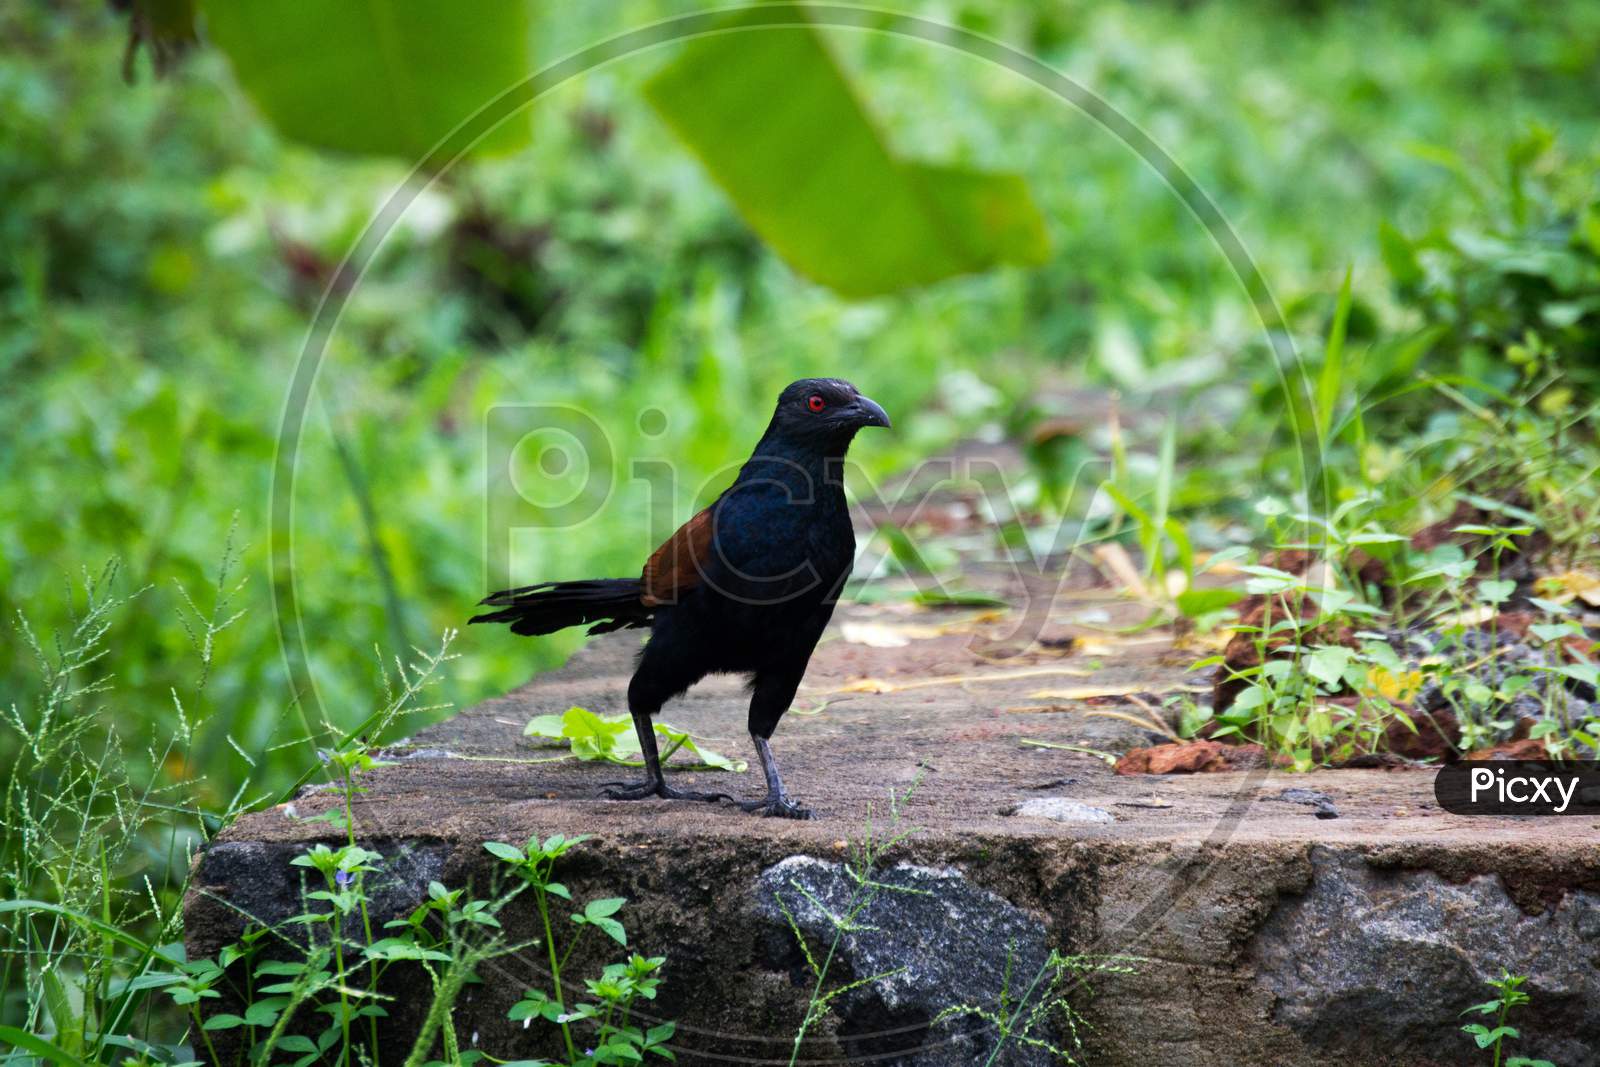 Indian Greater Coucal Or Crow Pheasant Walking On The Rock